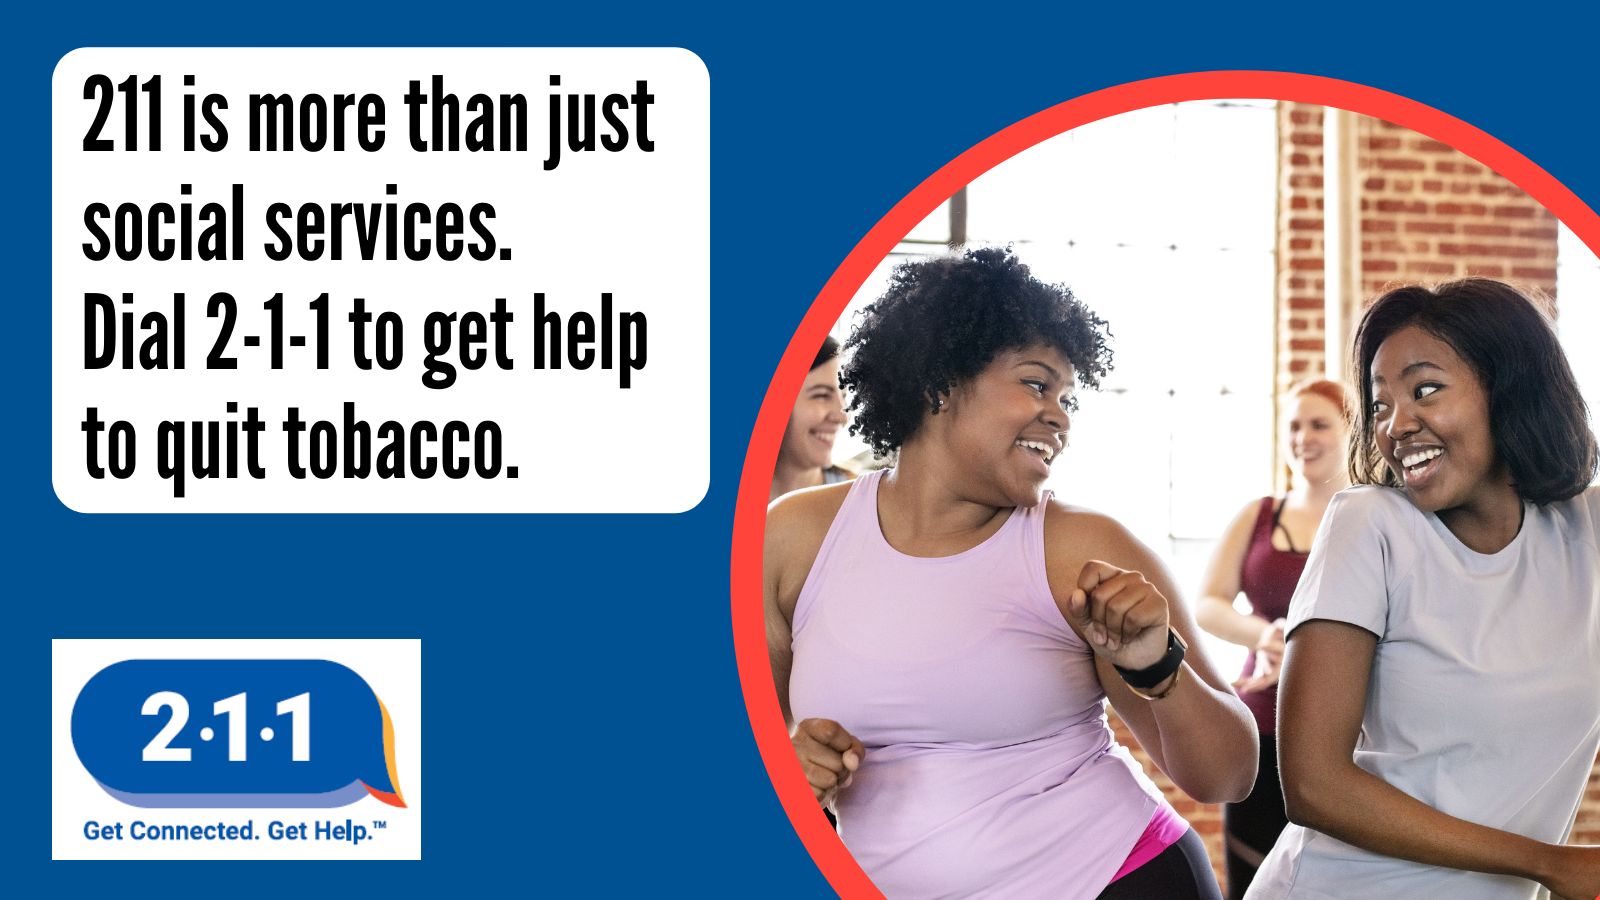 Women exercising and text: 211 is more than just social services. Dial 2-1-1 to get help to quit tobacco. 2-1-1